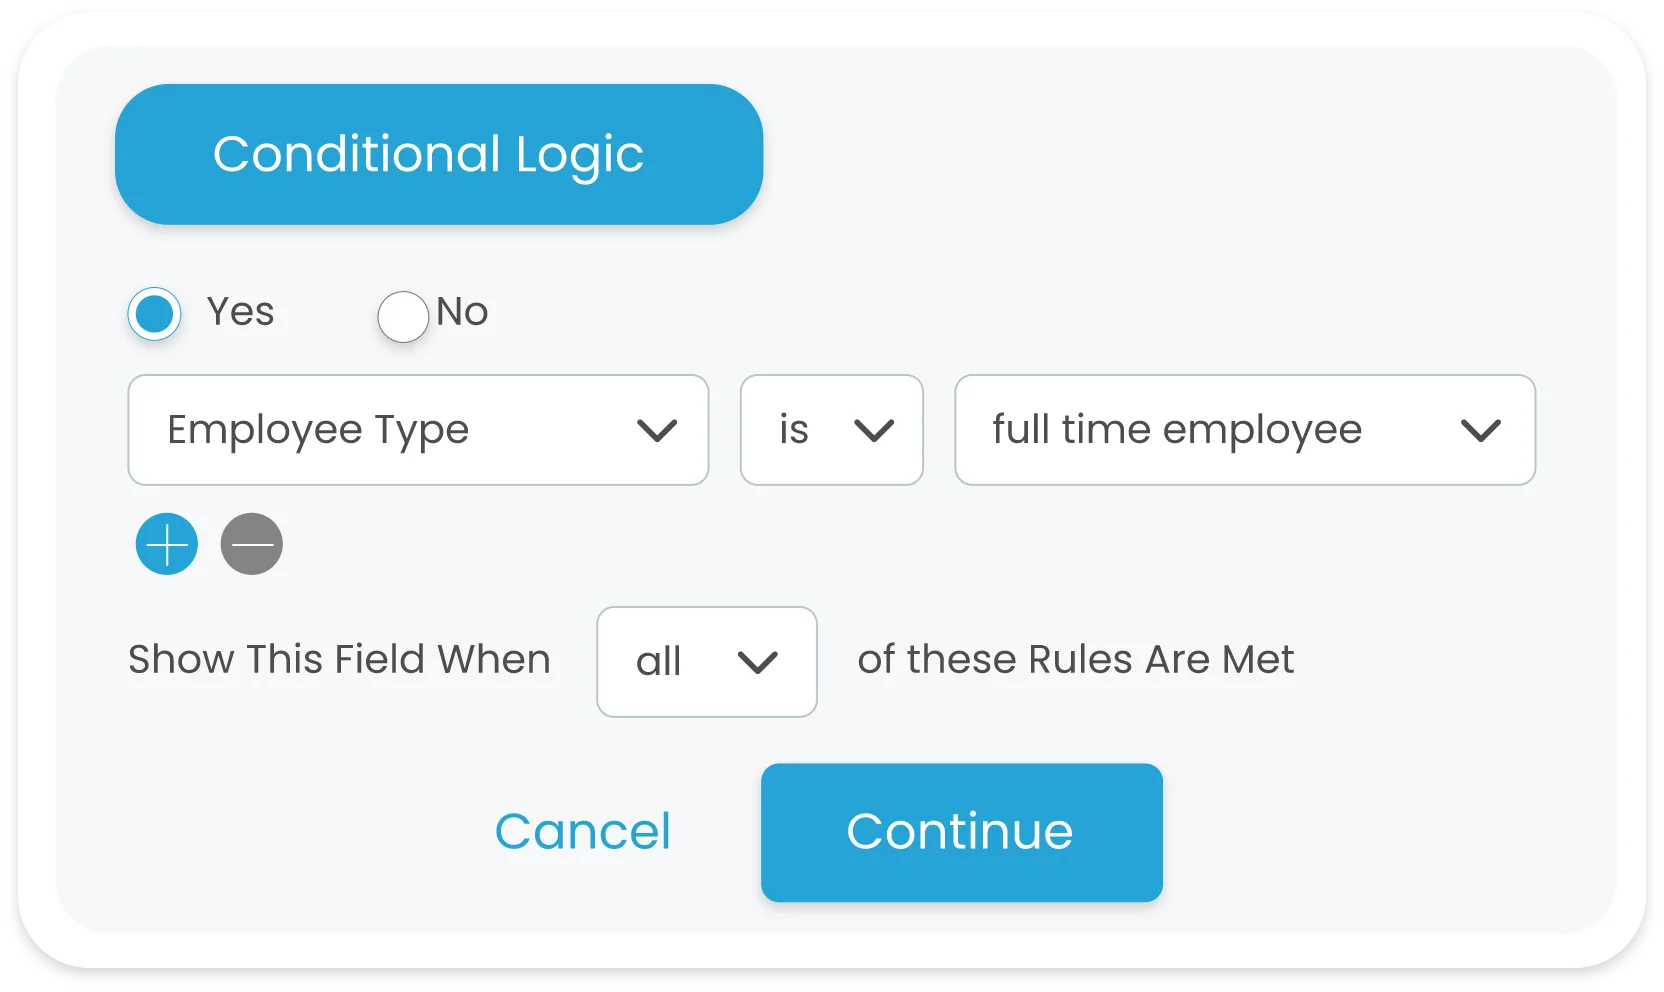 Conditional Logic Inspection Form